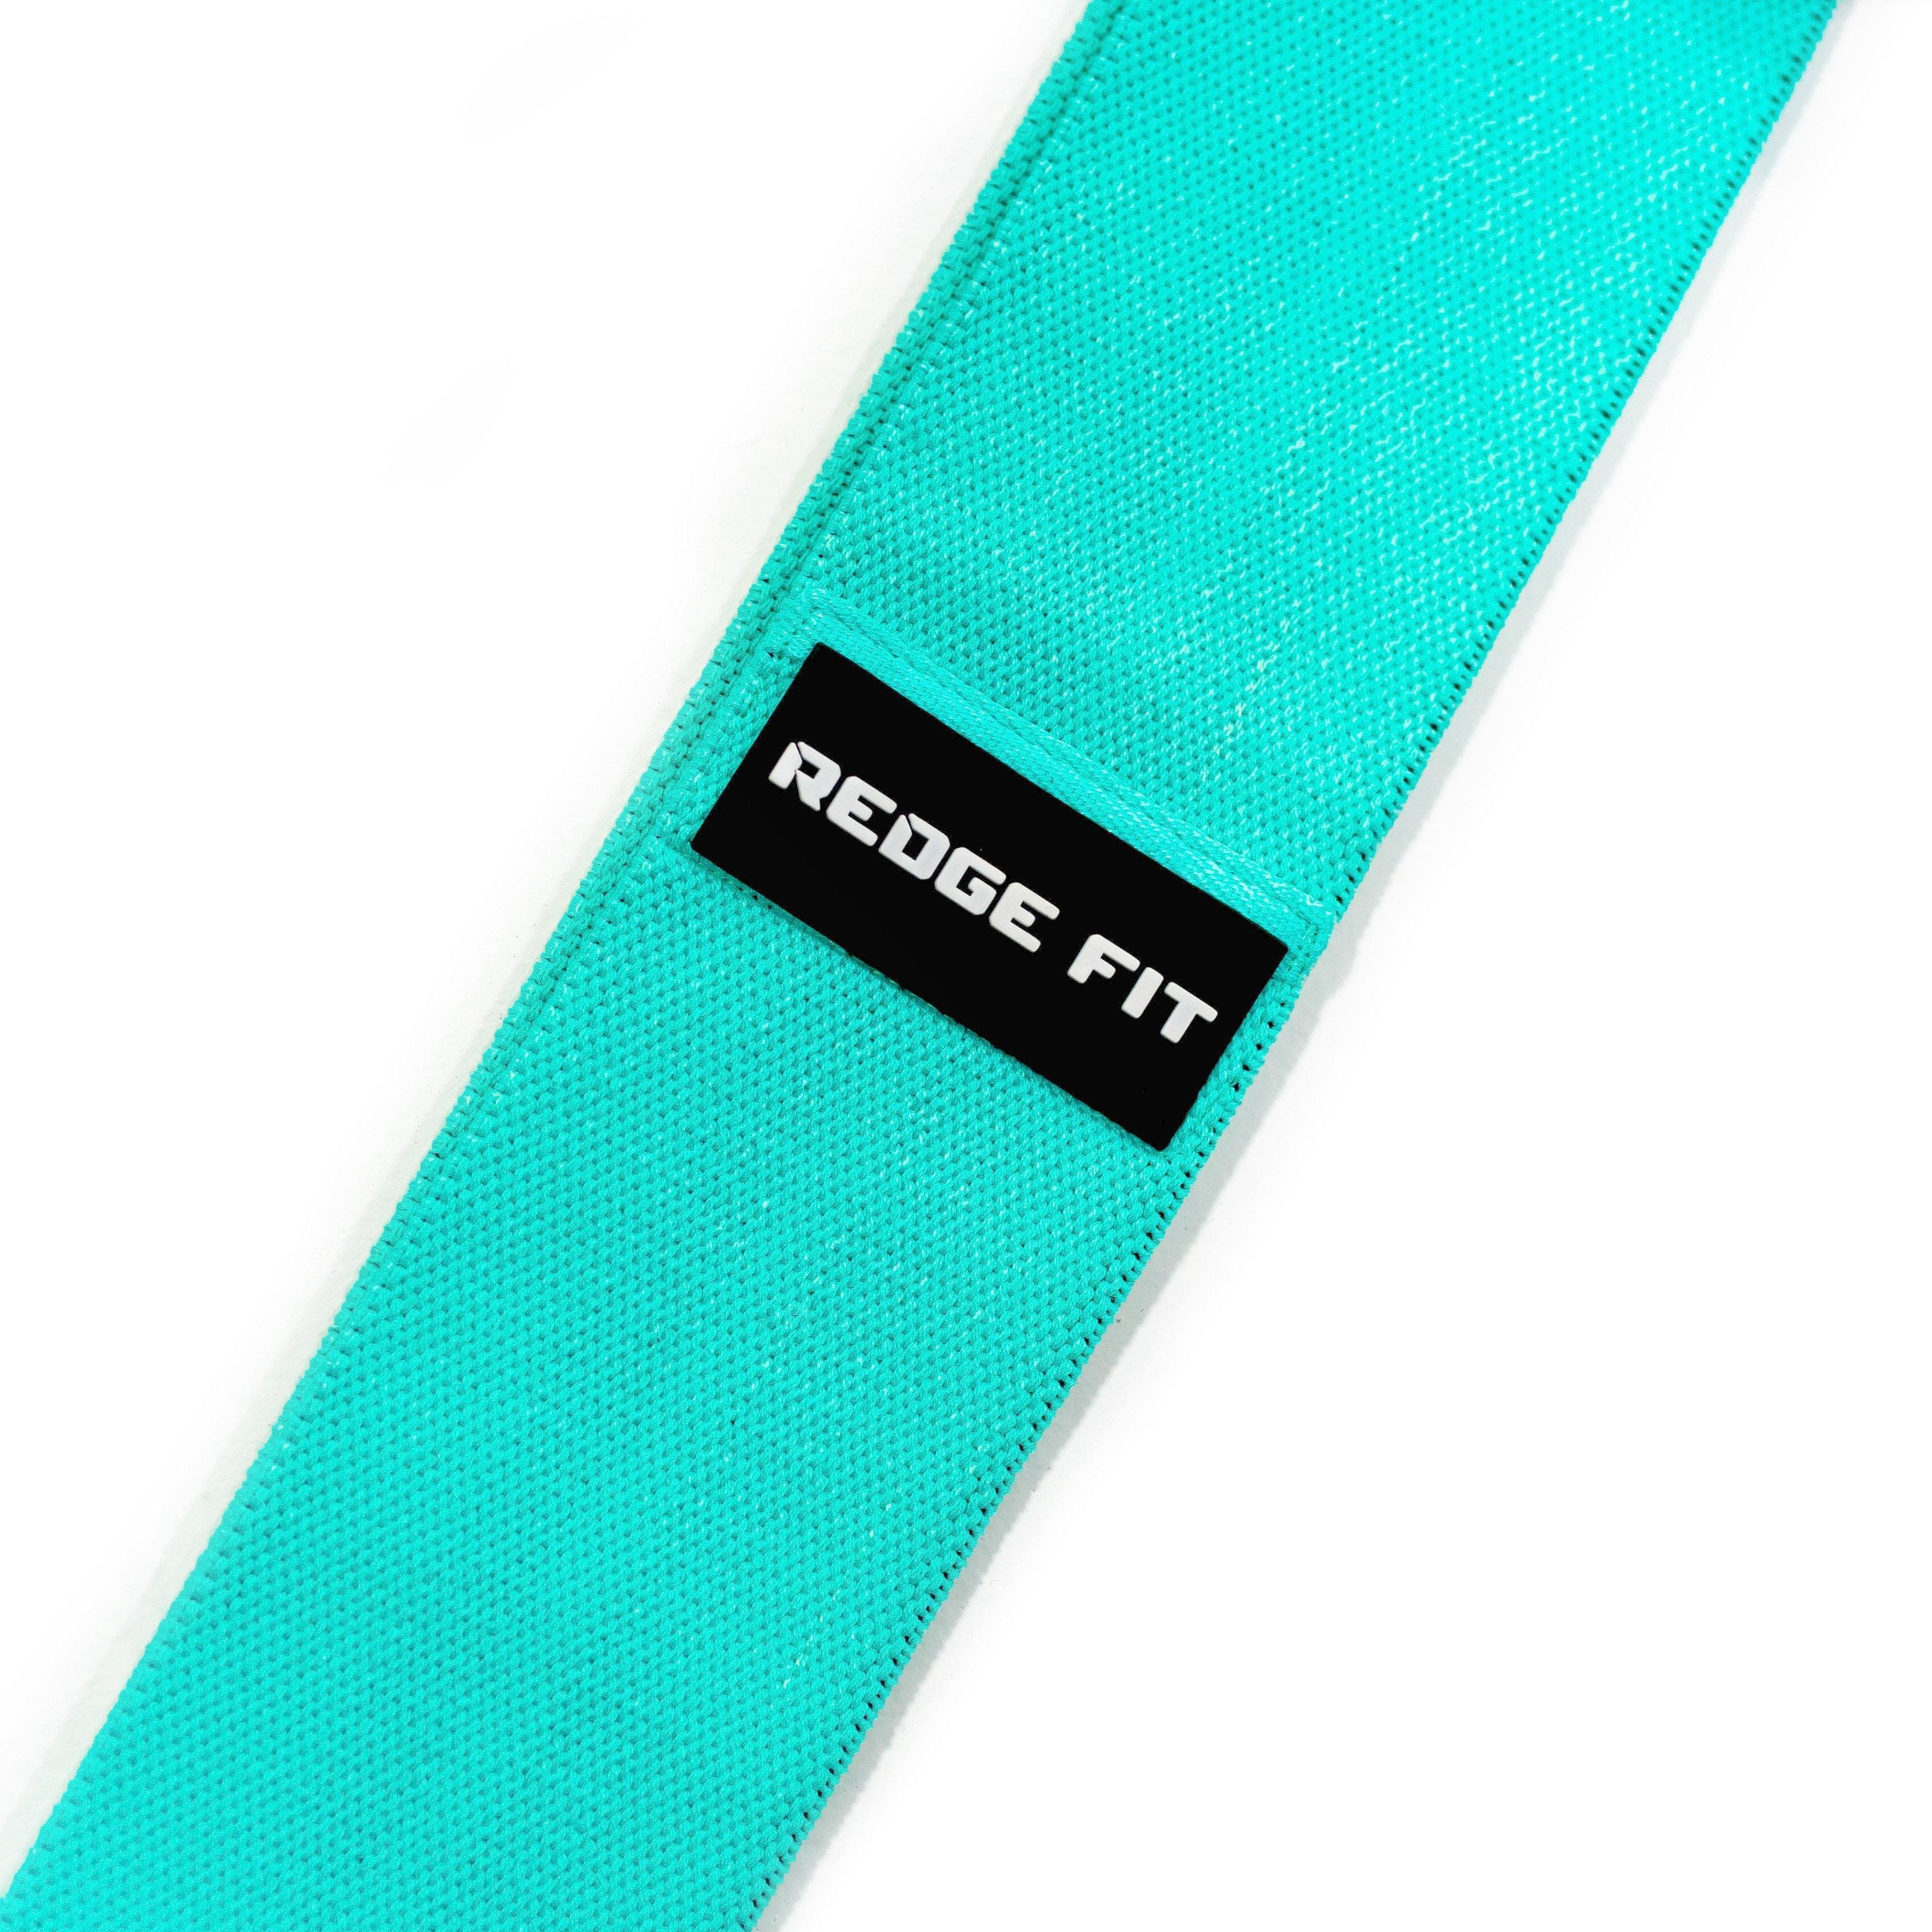 Resistance/Sizing: Teal: Heavy weight 18-27kg (40-60lbs), 74cm long and 8cm wide. Material:  40% Cotton, 60% Latex Available at https://www.getredge.com/products/redge-resistance-band-set